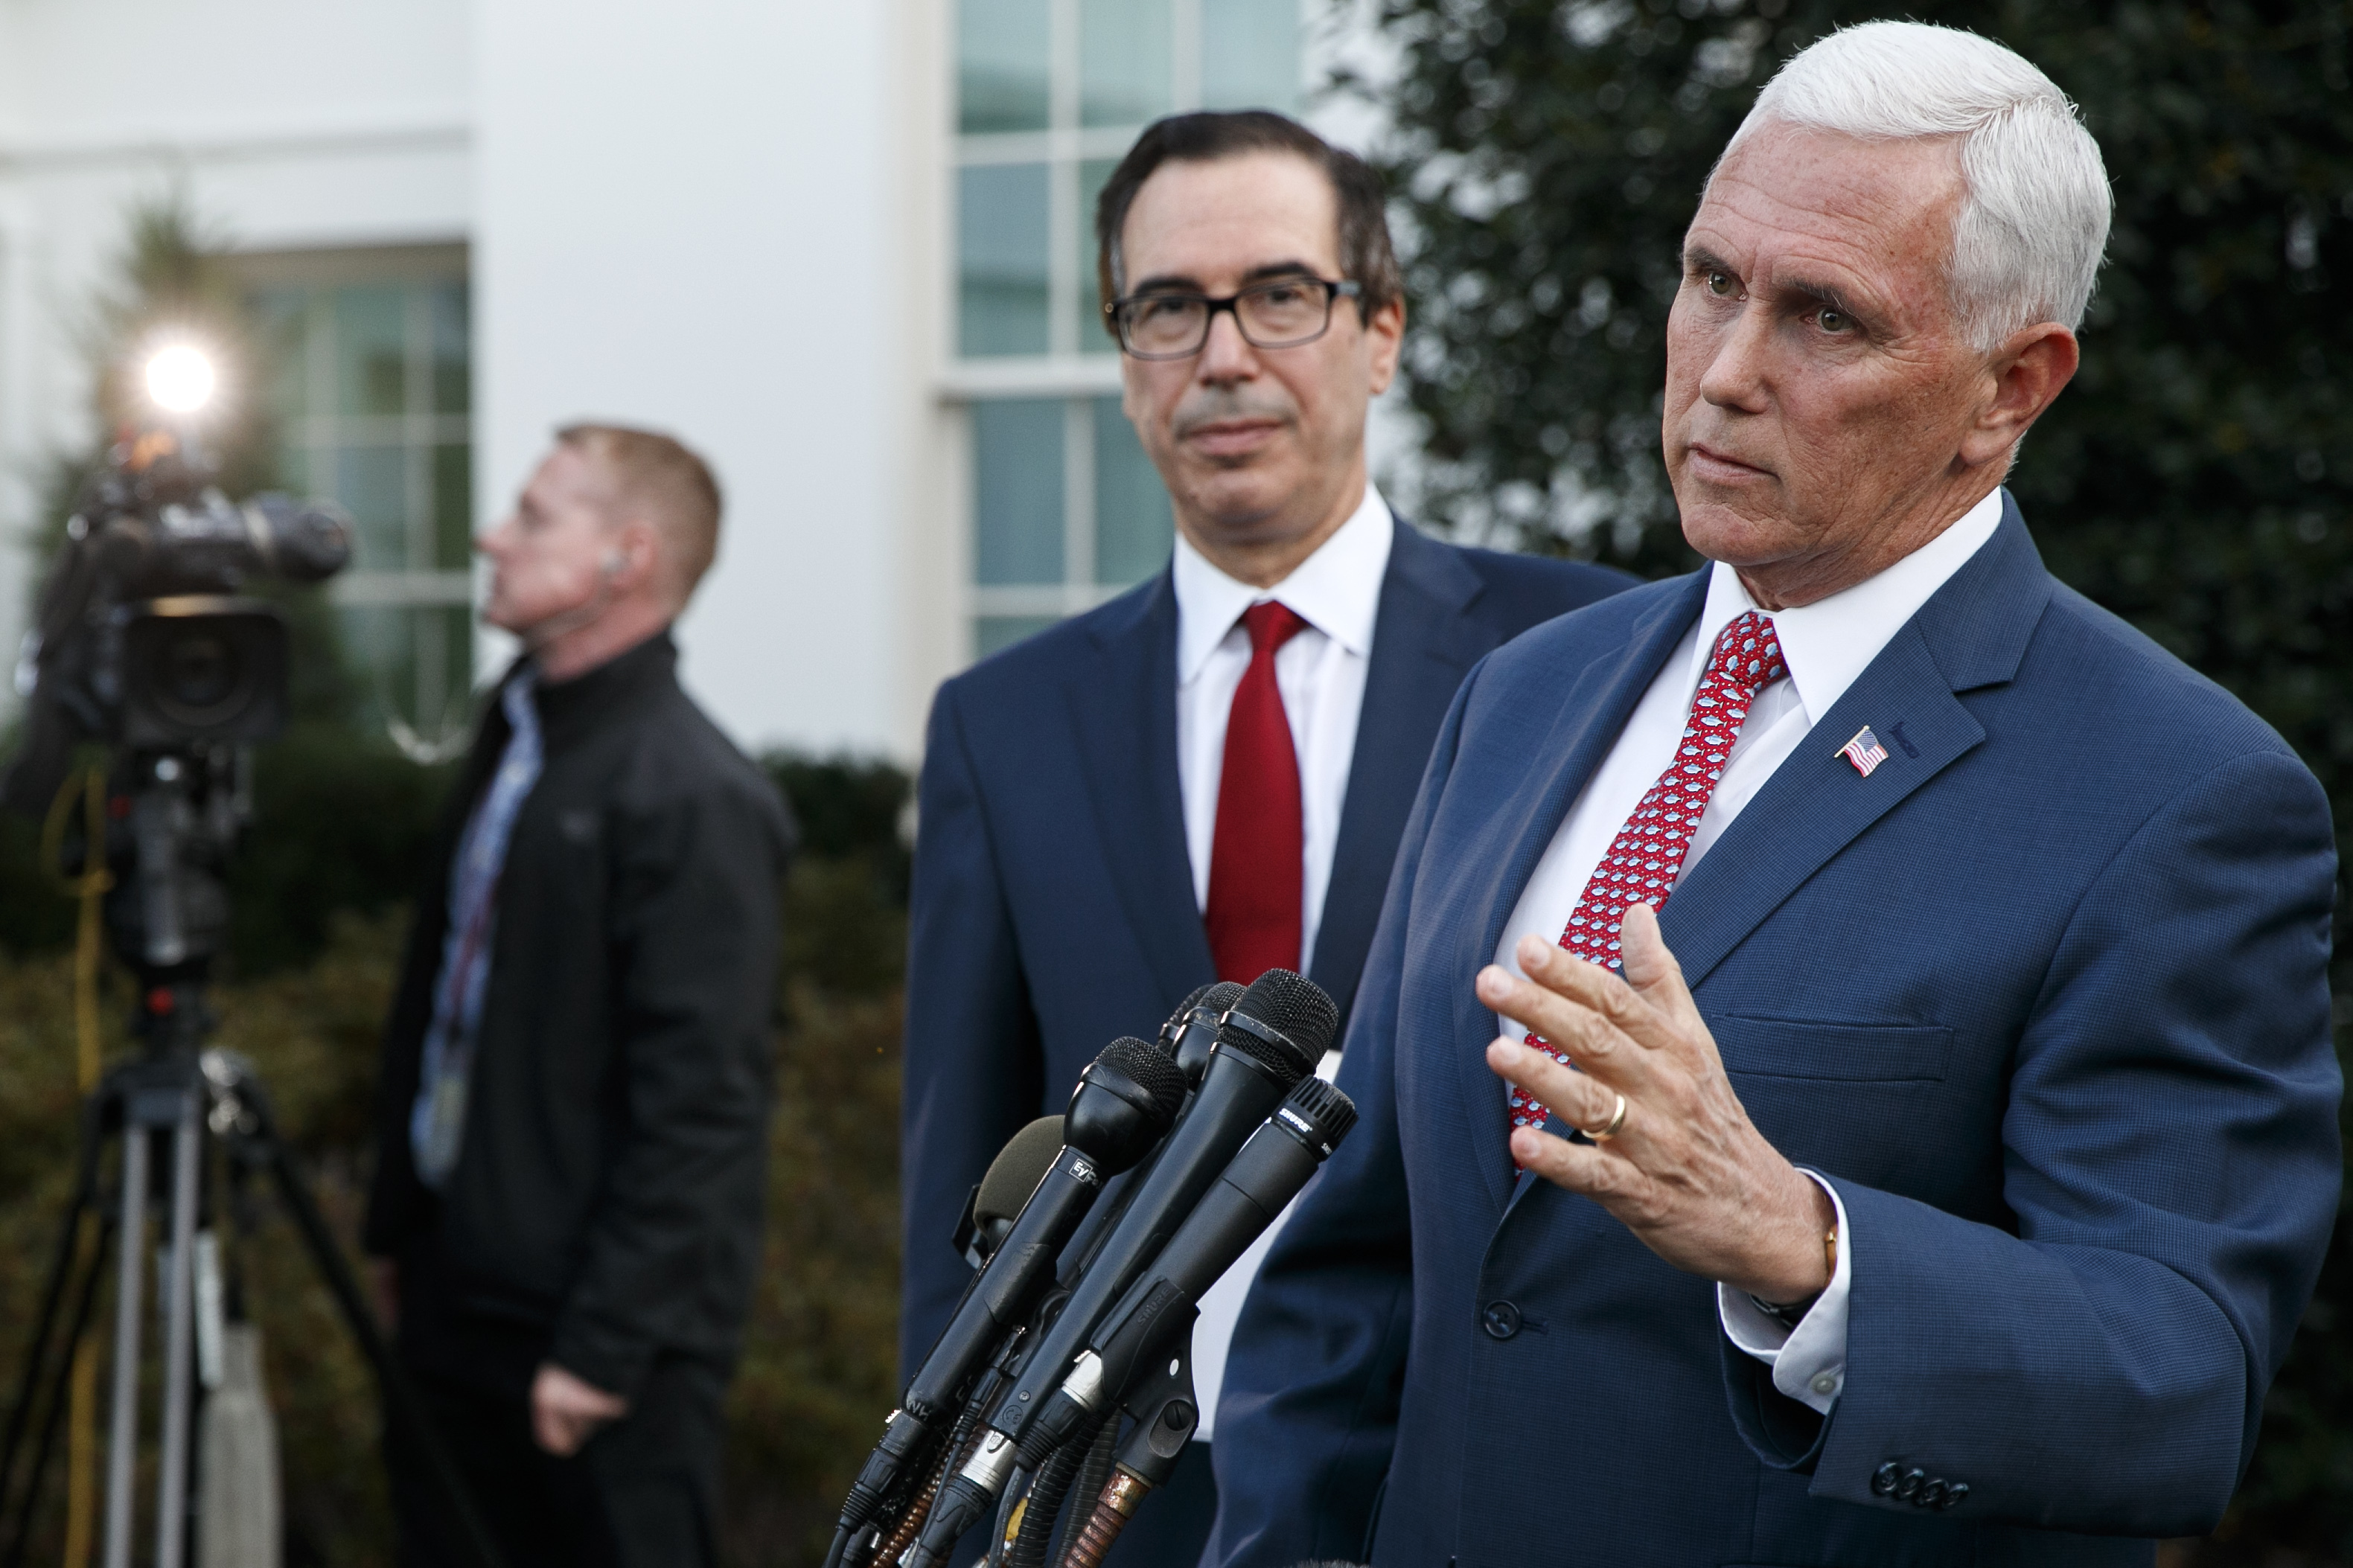 Vice President Mike Pence, with Treasury Secretary Steven Mnuchin, speaks to reporters outside the West Wing of the White House, Monday, Oct. 14, 2019, in Washington. The U.S. is calling for an immediate ceasefire in Turkey's strikes against Kurds in Syria, and is sending Pence to lead mediation effort (AP Photo/Jacquelyn Martin)